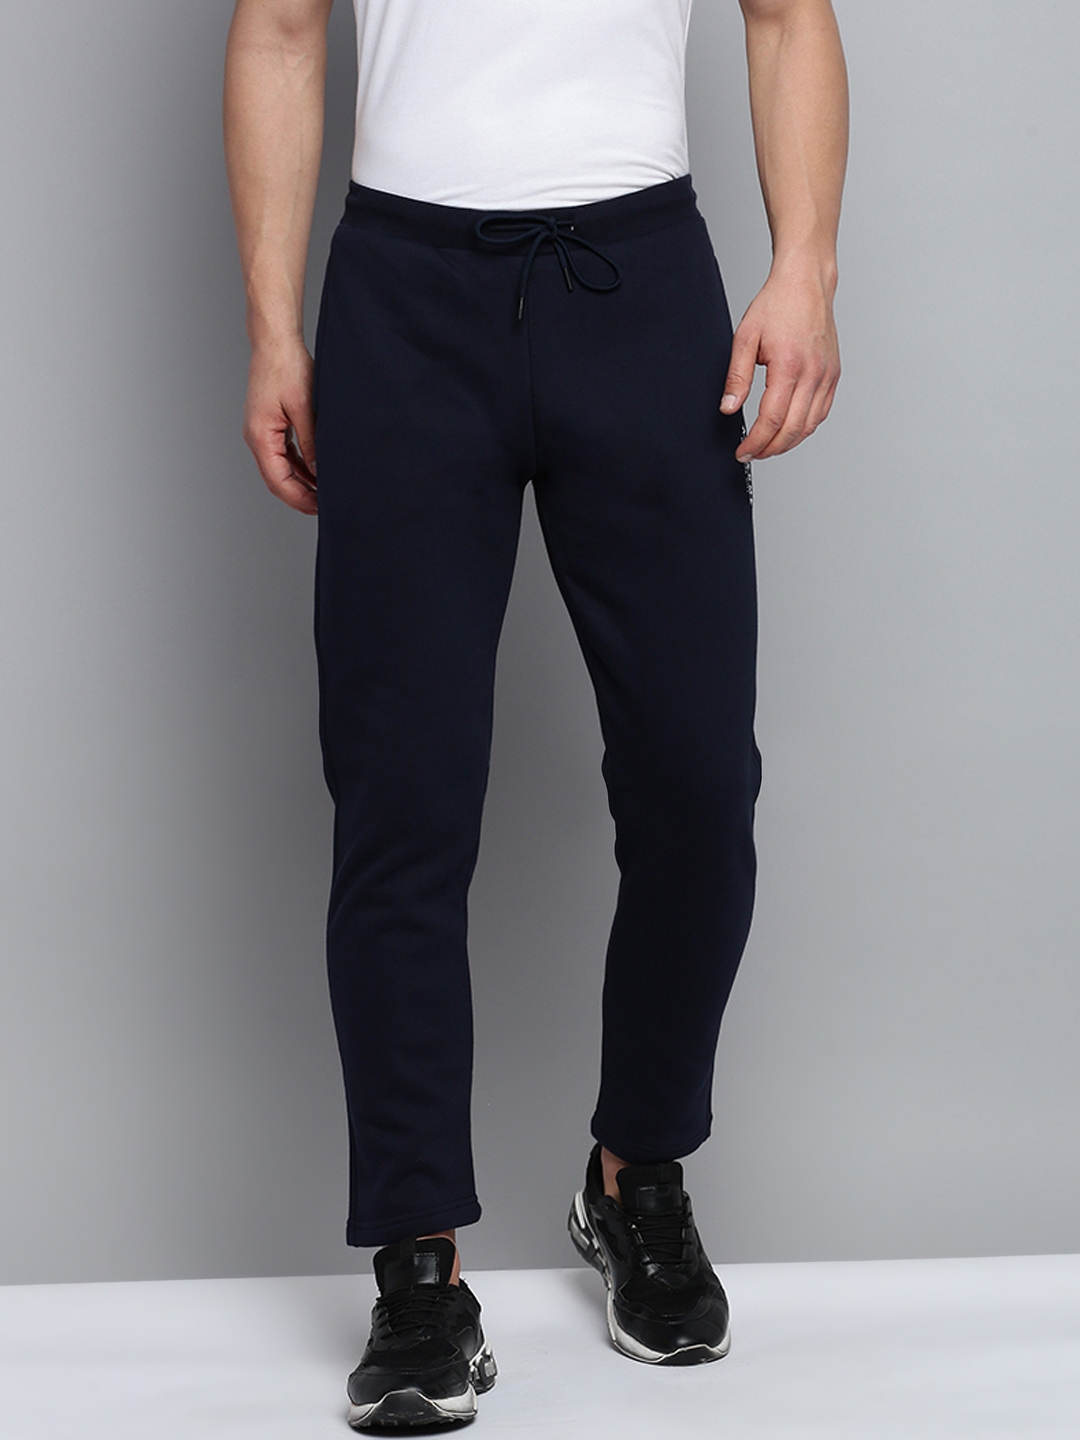 Men's Bottoms ▻Athletic and cool | arena